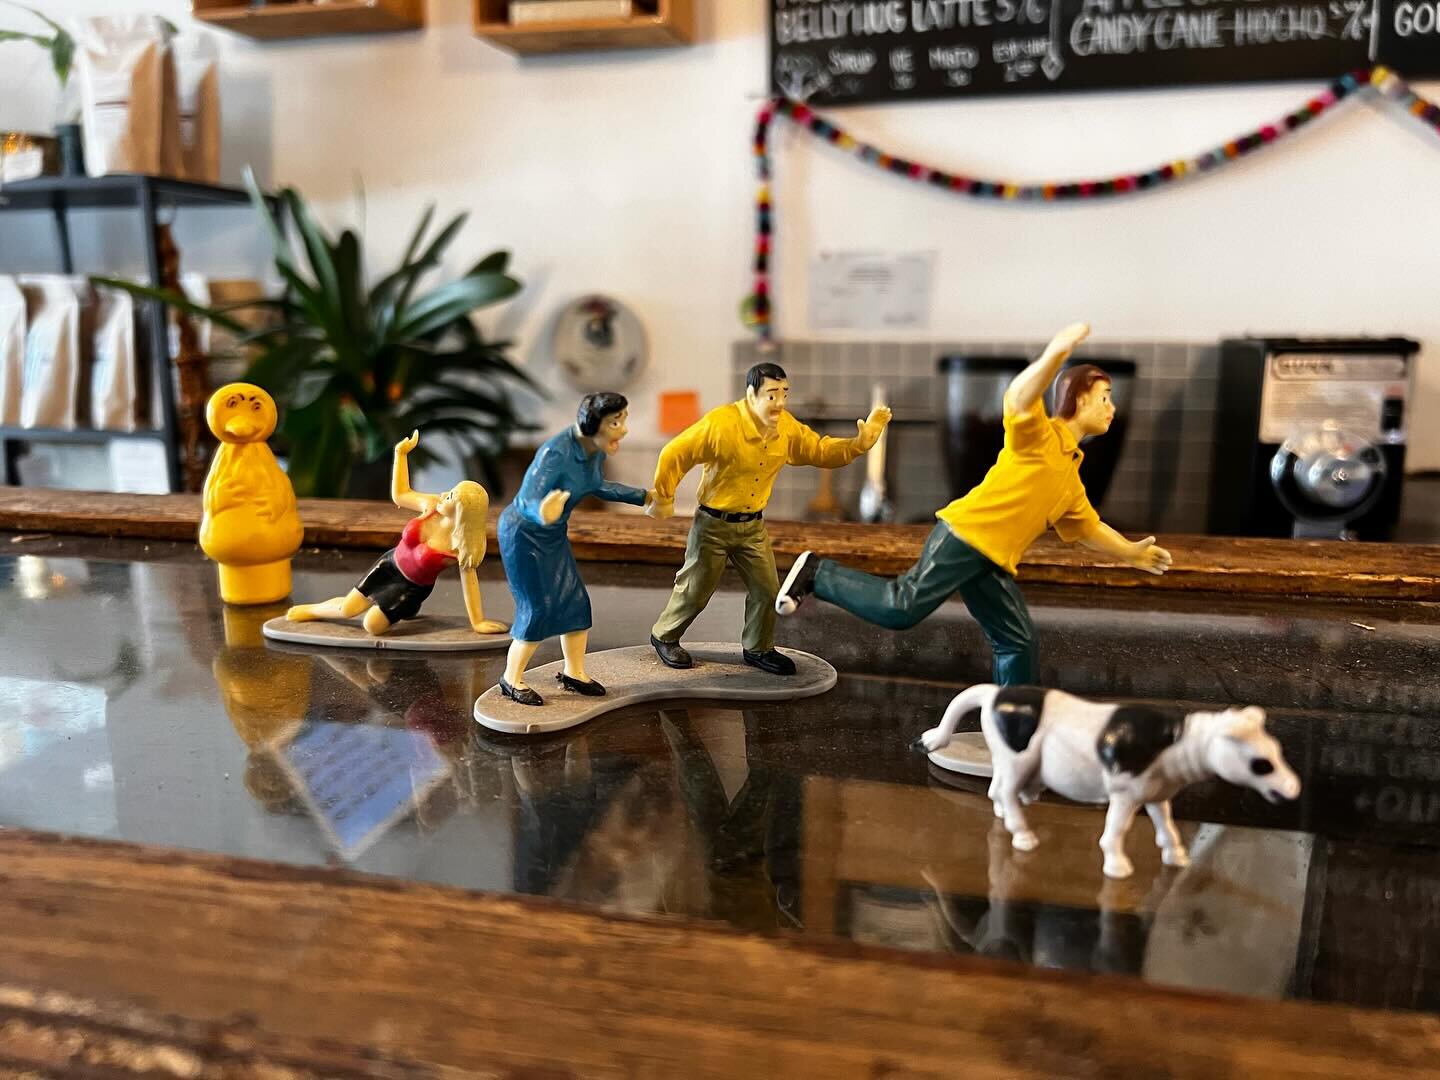 Big Bird may not be chasing you, but you should still run down to Vintage to come get some steamin&rsquo; hot coffee and fresh treats! Open until 3:00 today! ❤️ 

#local #hamiltonlocal #hamiltoncoffee #hamontcoffee #vintagecoffeeroasters #coffee